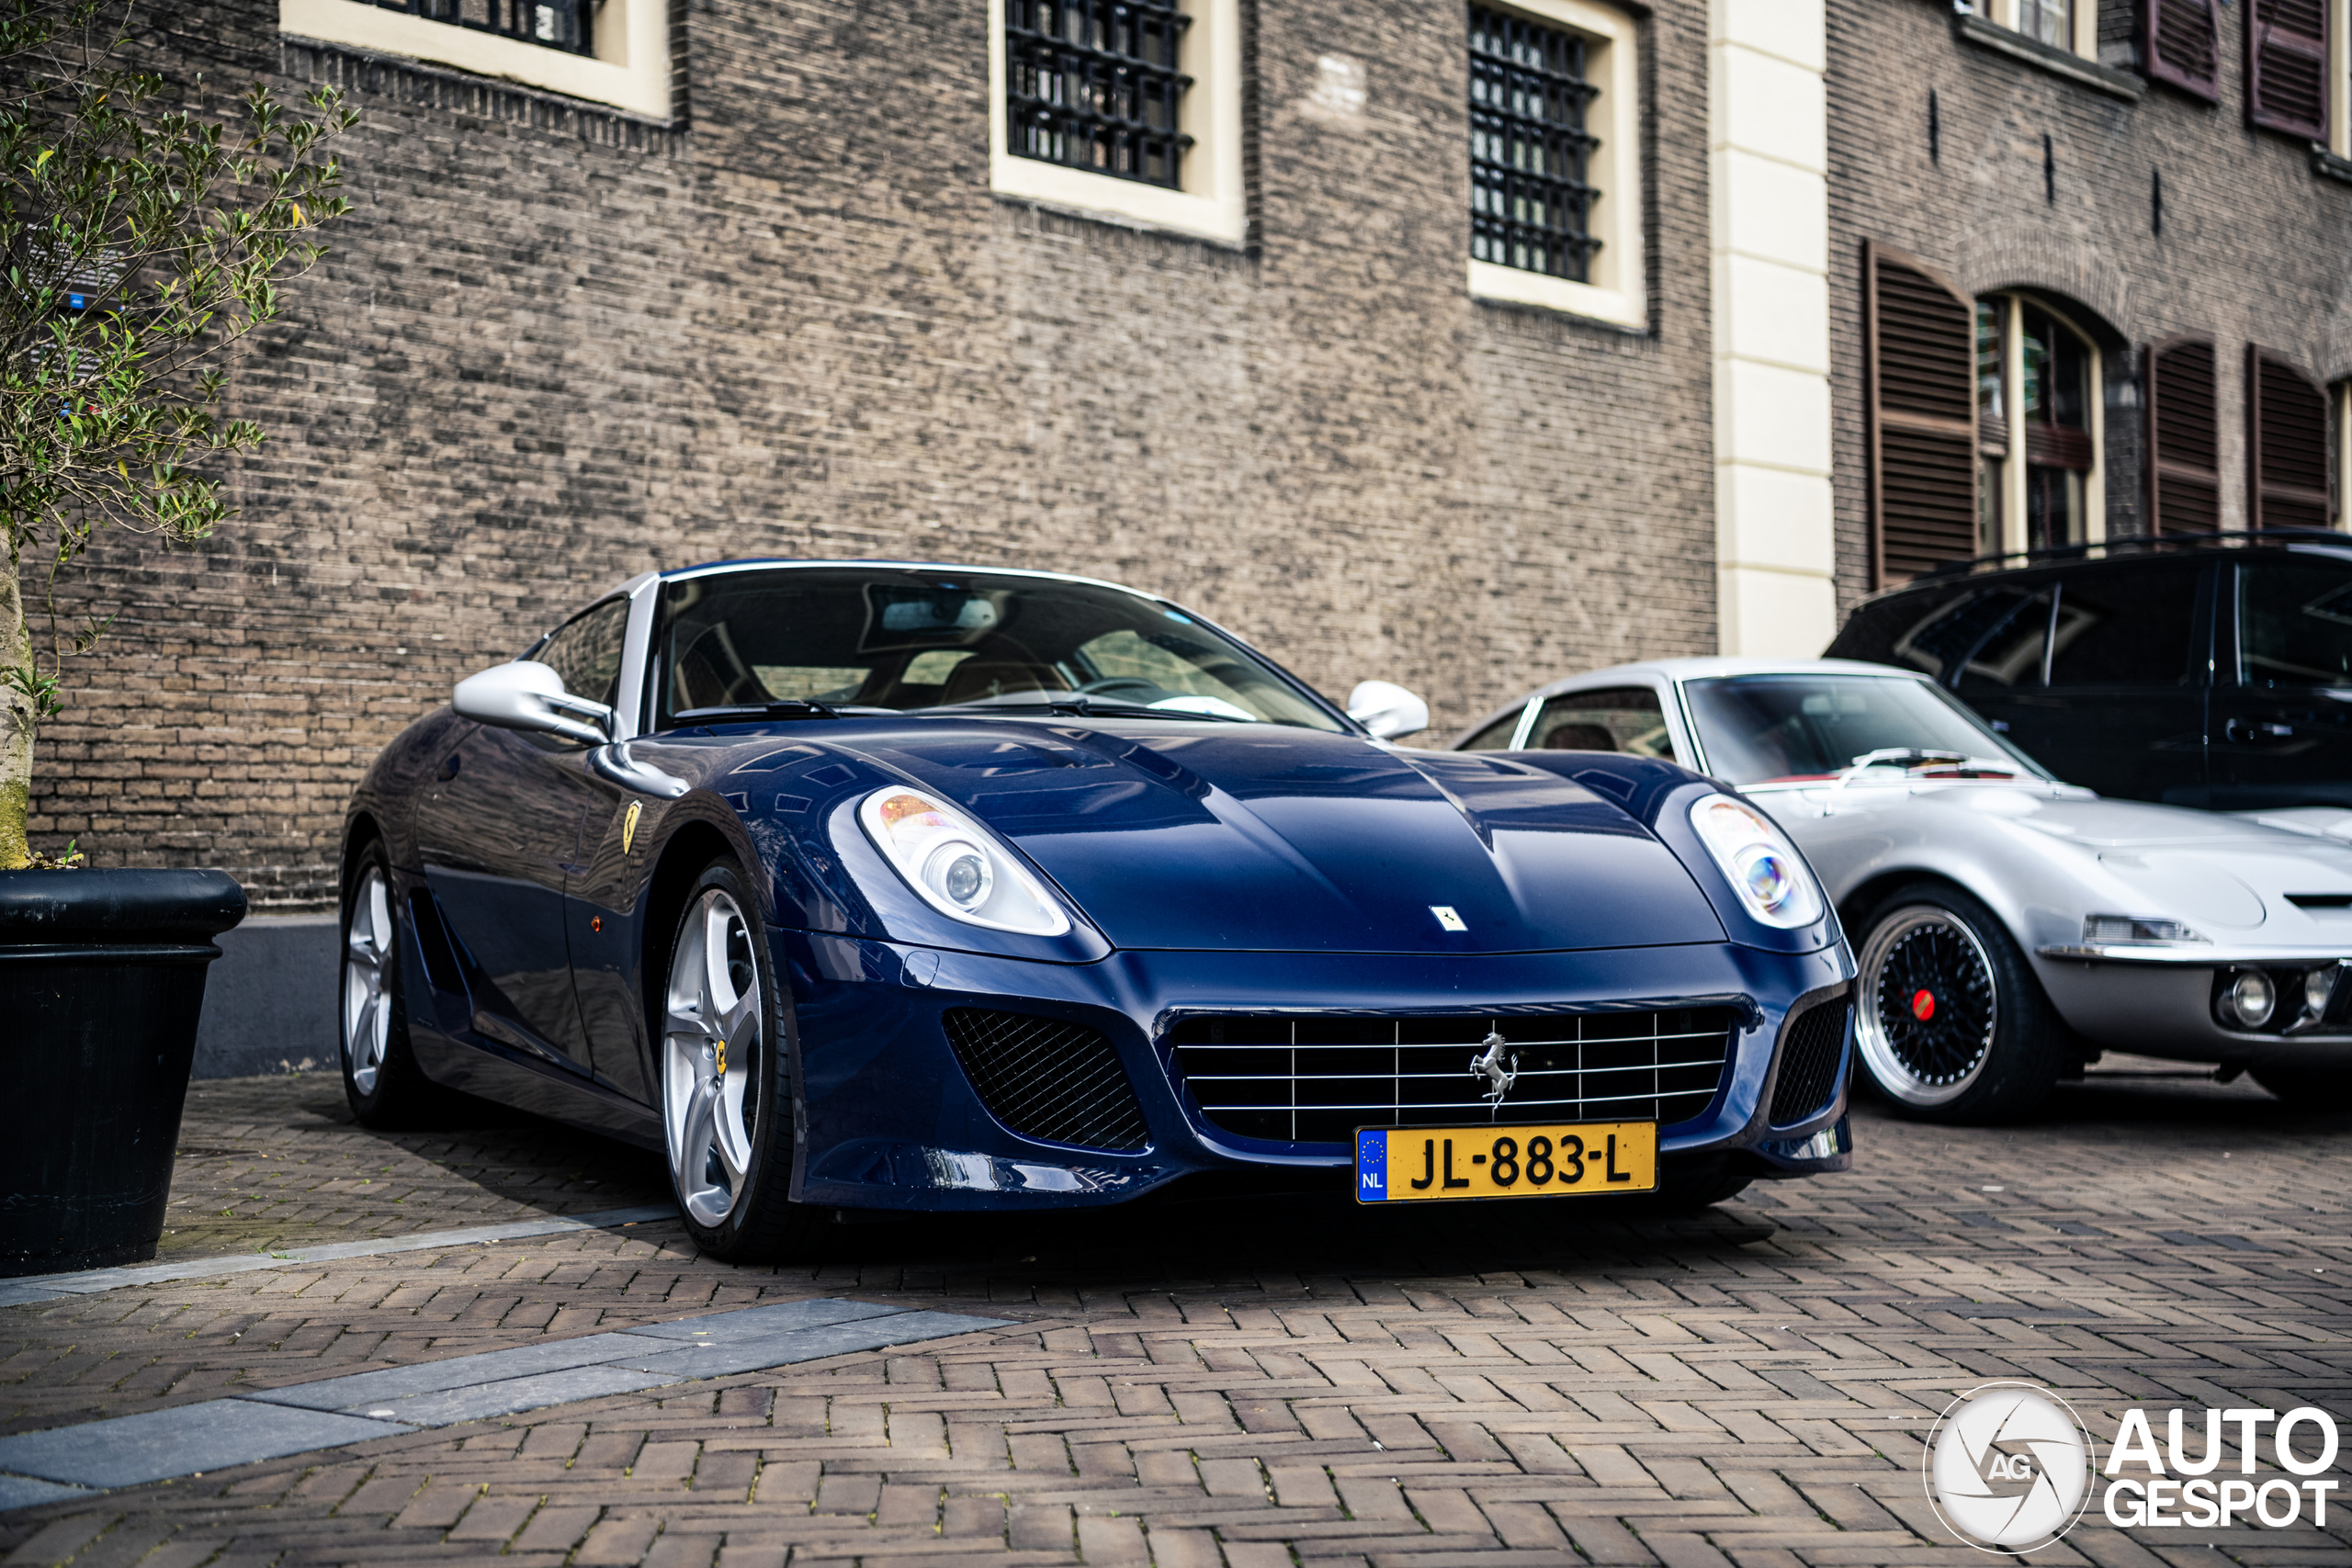 A magnificent SA Aperta appears in the netherlands